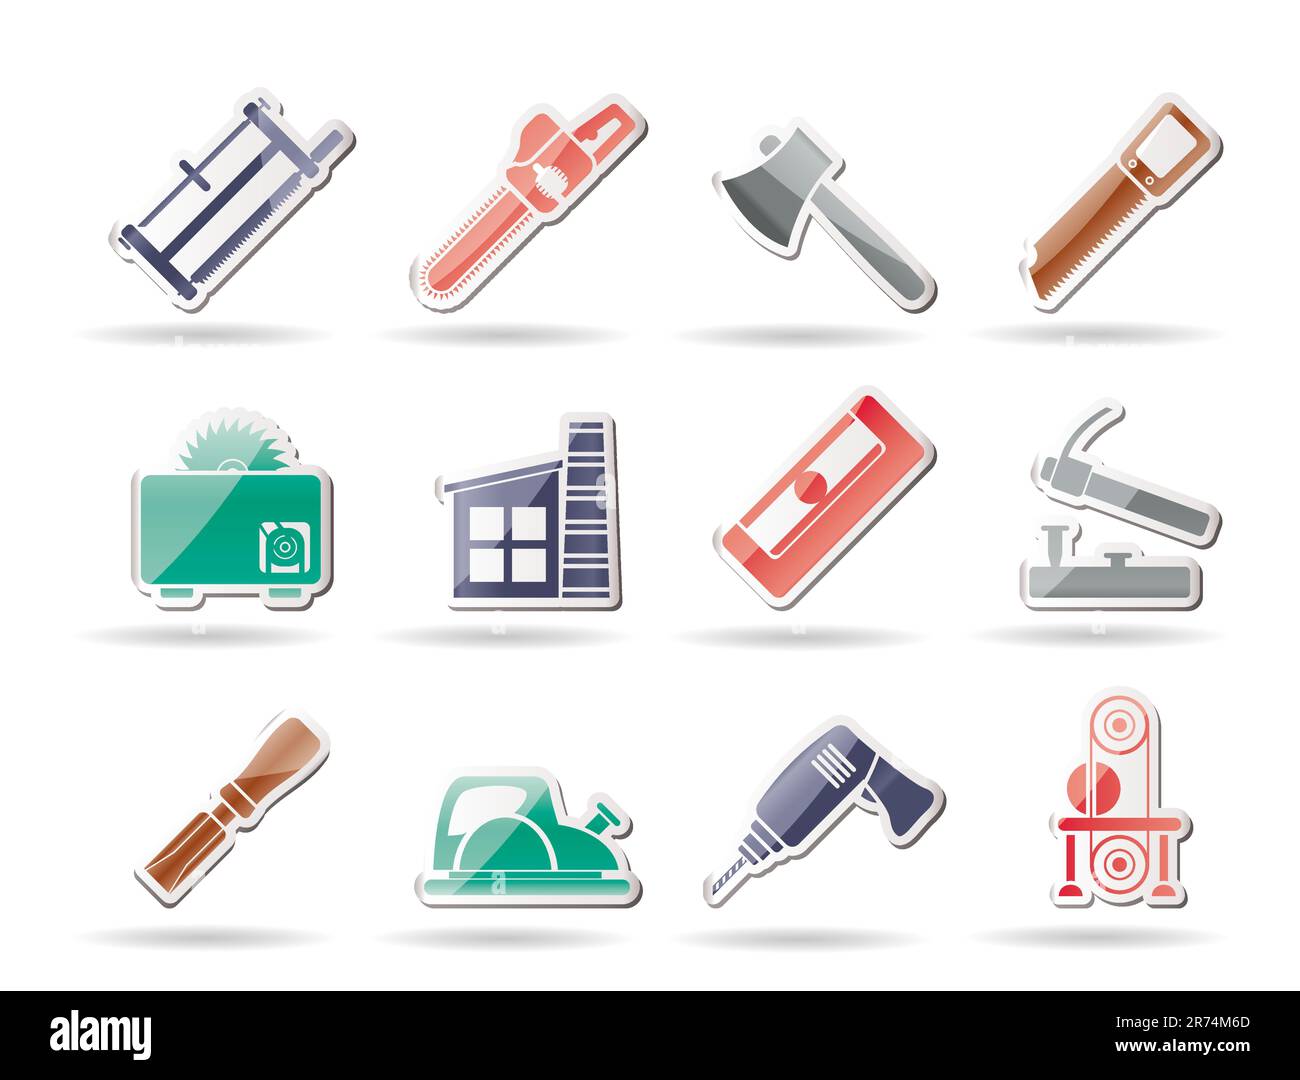 Woodworking industry and Woodworking tools icons - vector icon set Stock Vector